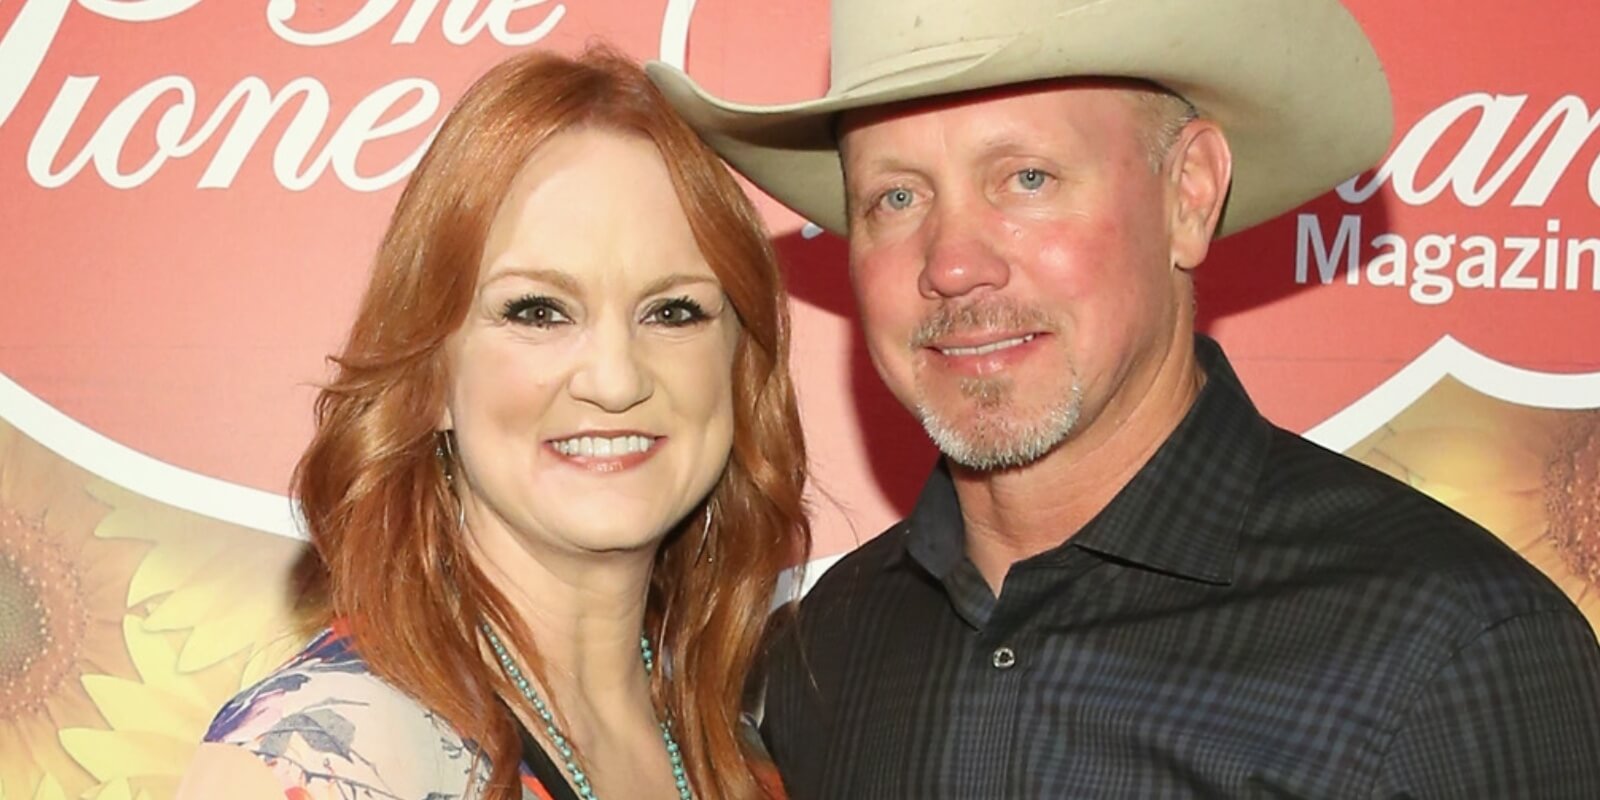 Ree Drummond and Ladd Drummond photographed in 2017.